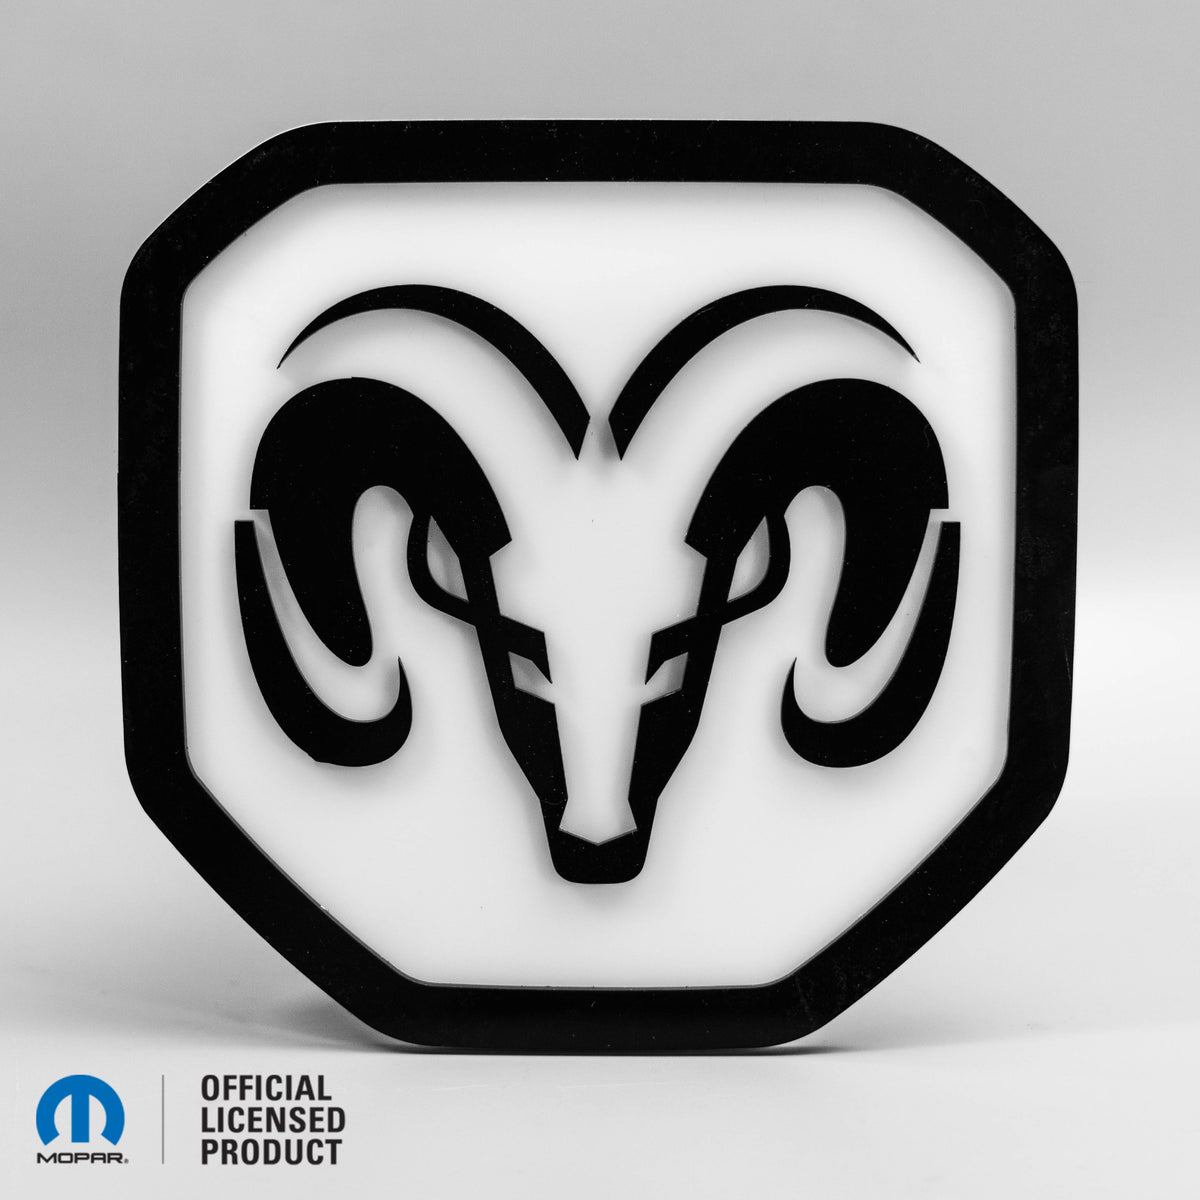 RAM® Head Logo Style 1 Tailgate Badge - Fits 2019-2023 RAM® Tailgate - 1500, 2500, 3500 - Gloss on White - Officially Licensed Product